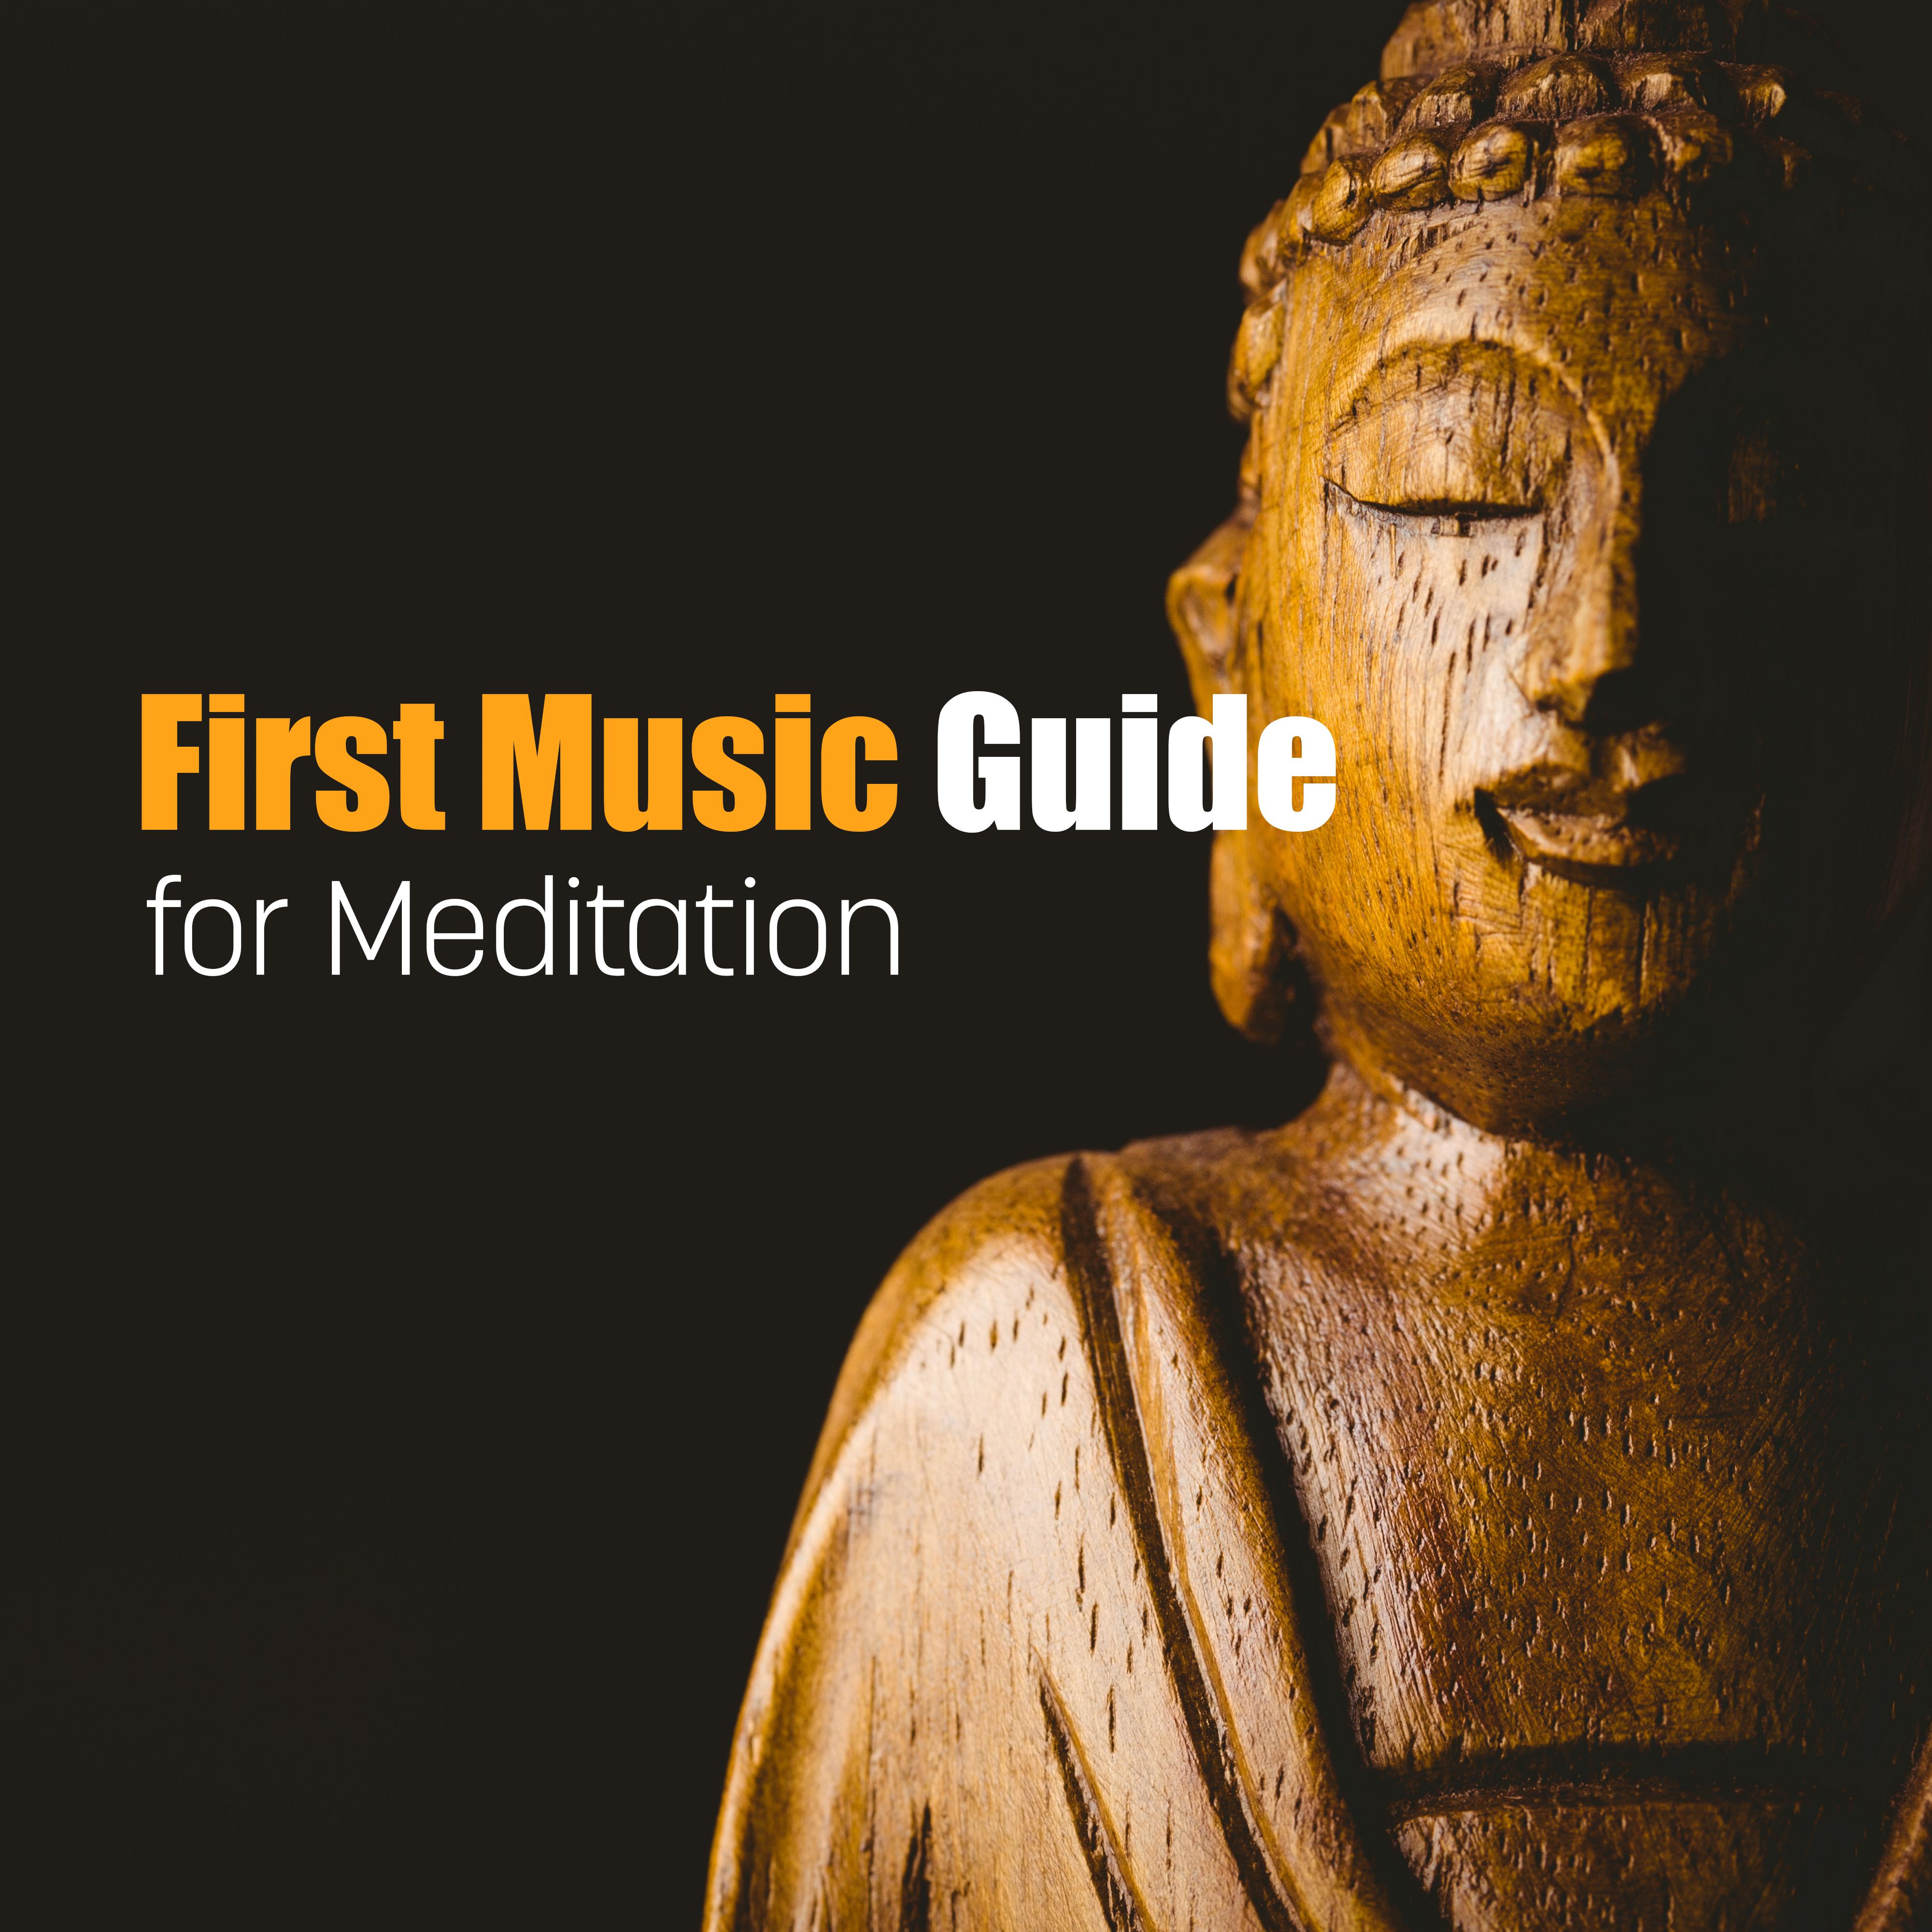 First Music Guide for Meditation